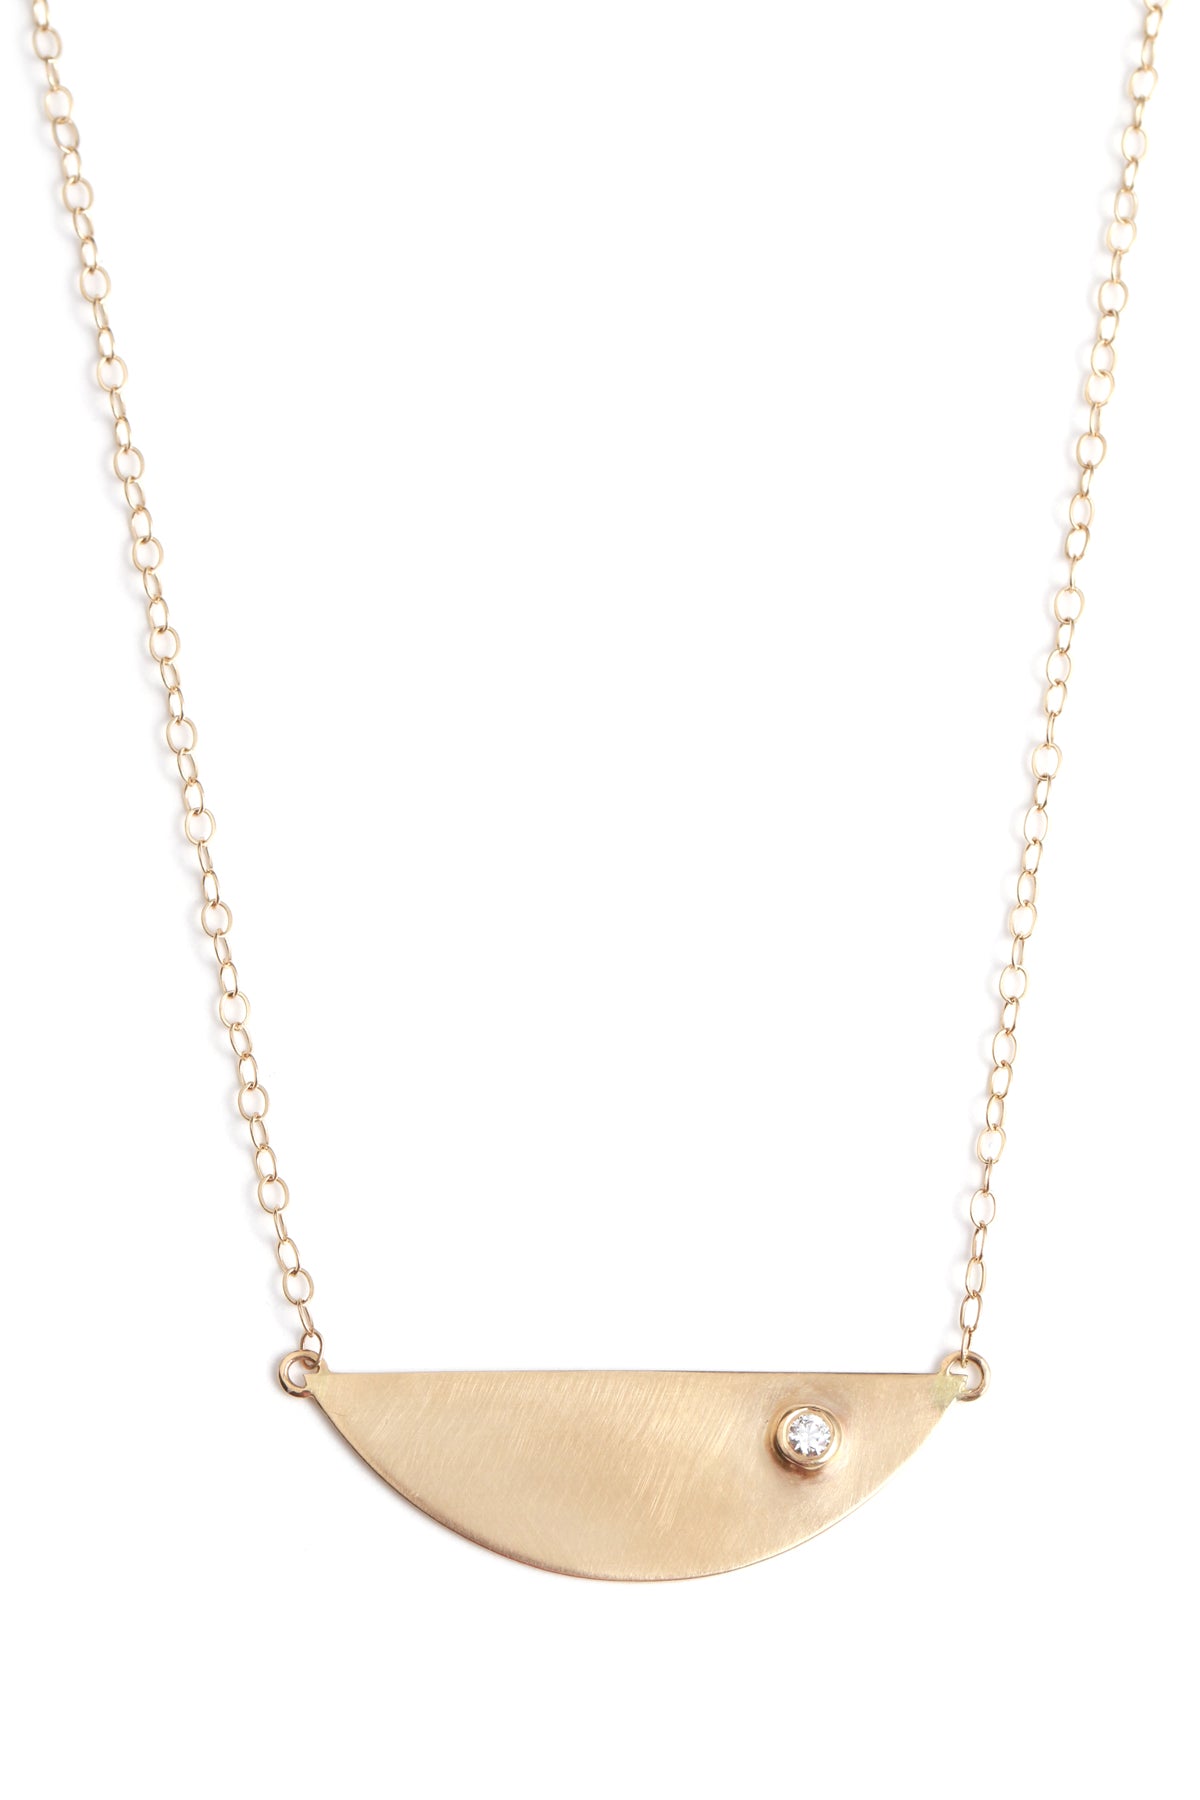 The Molly Necklace – Defoe & Co.